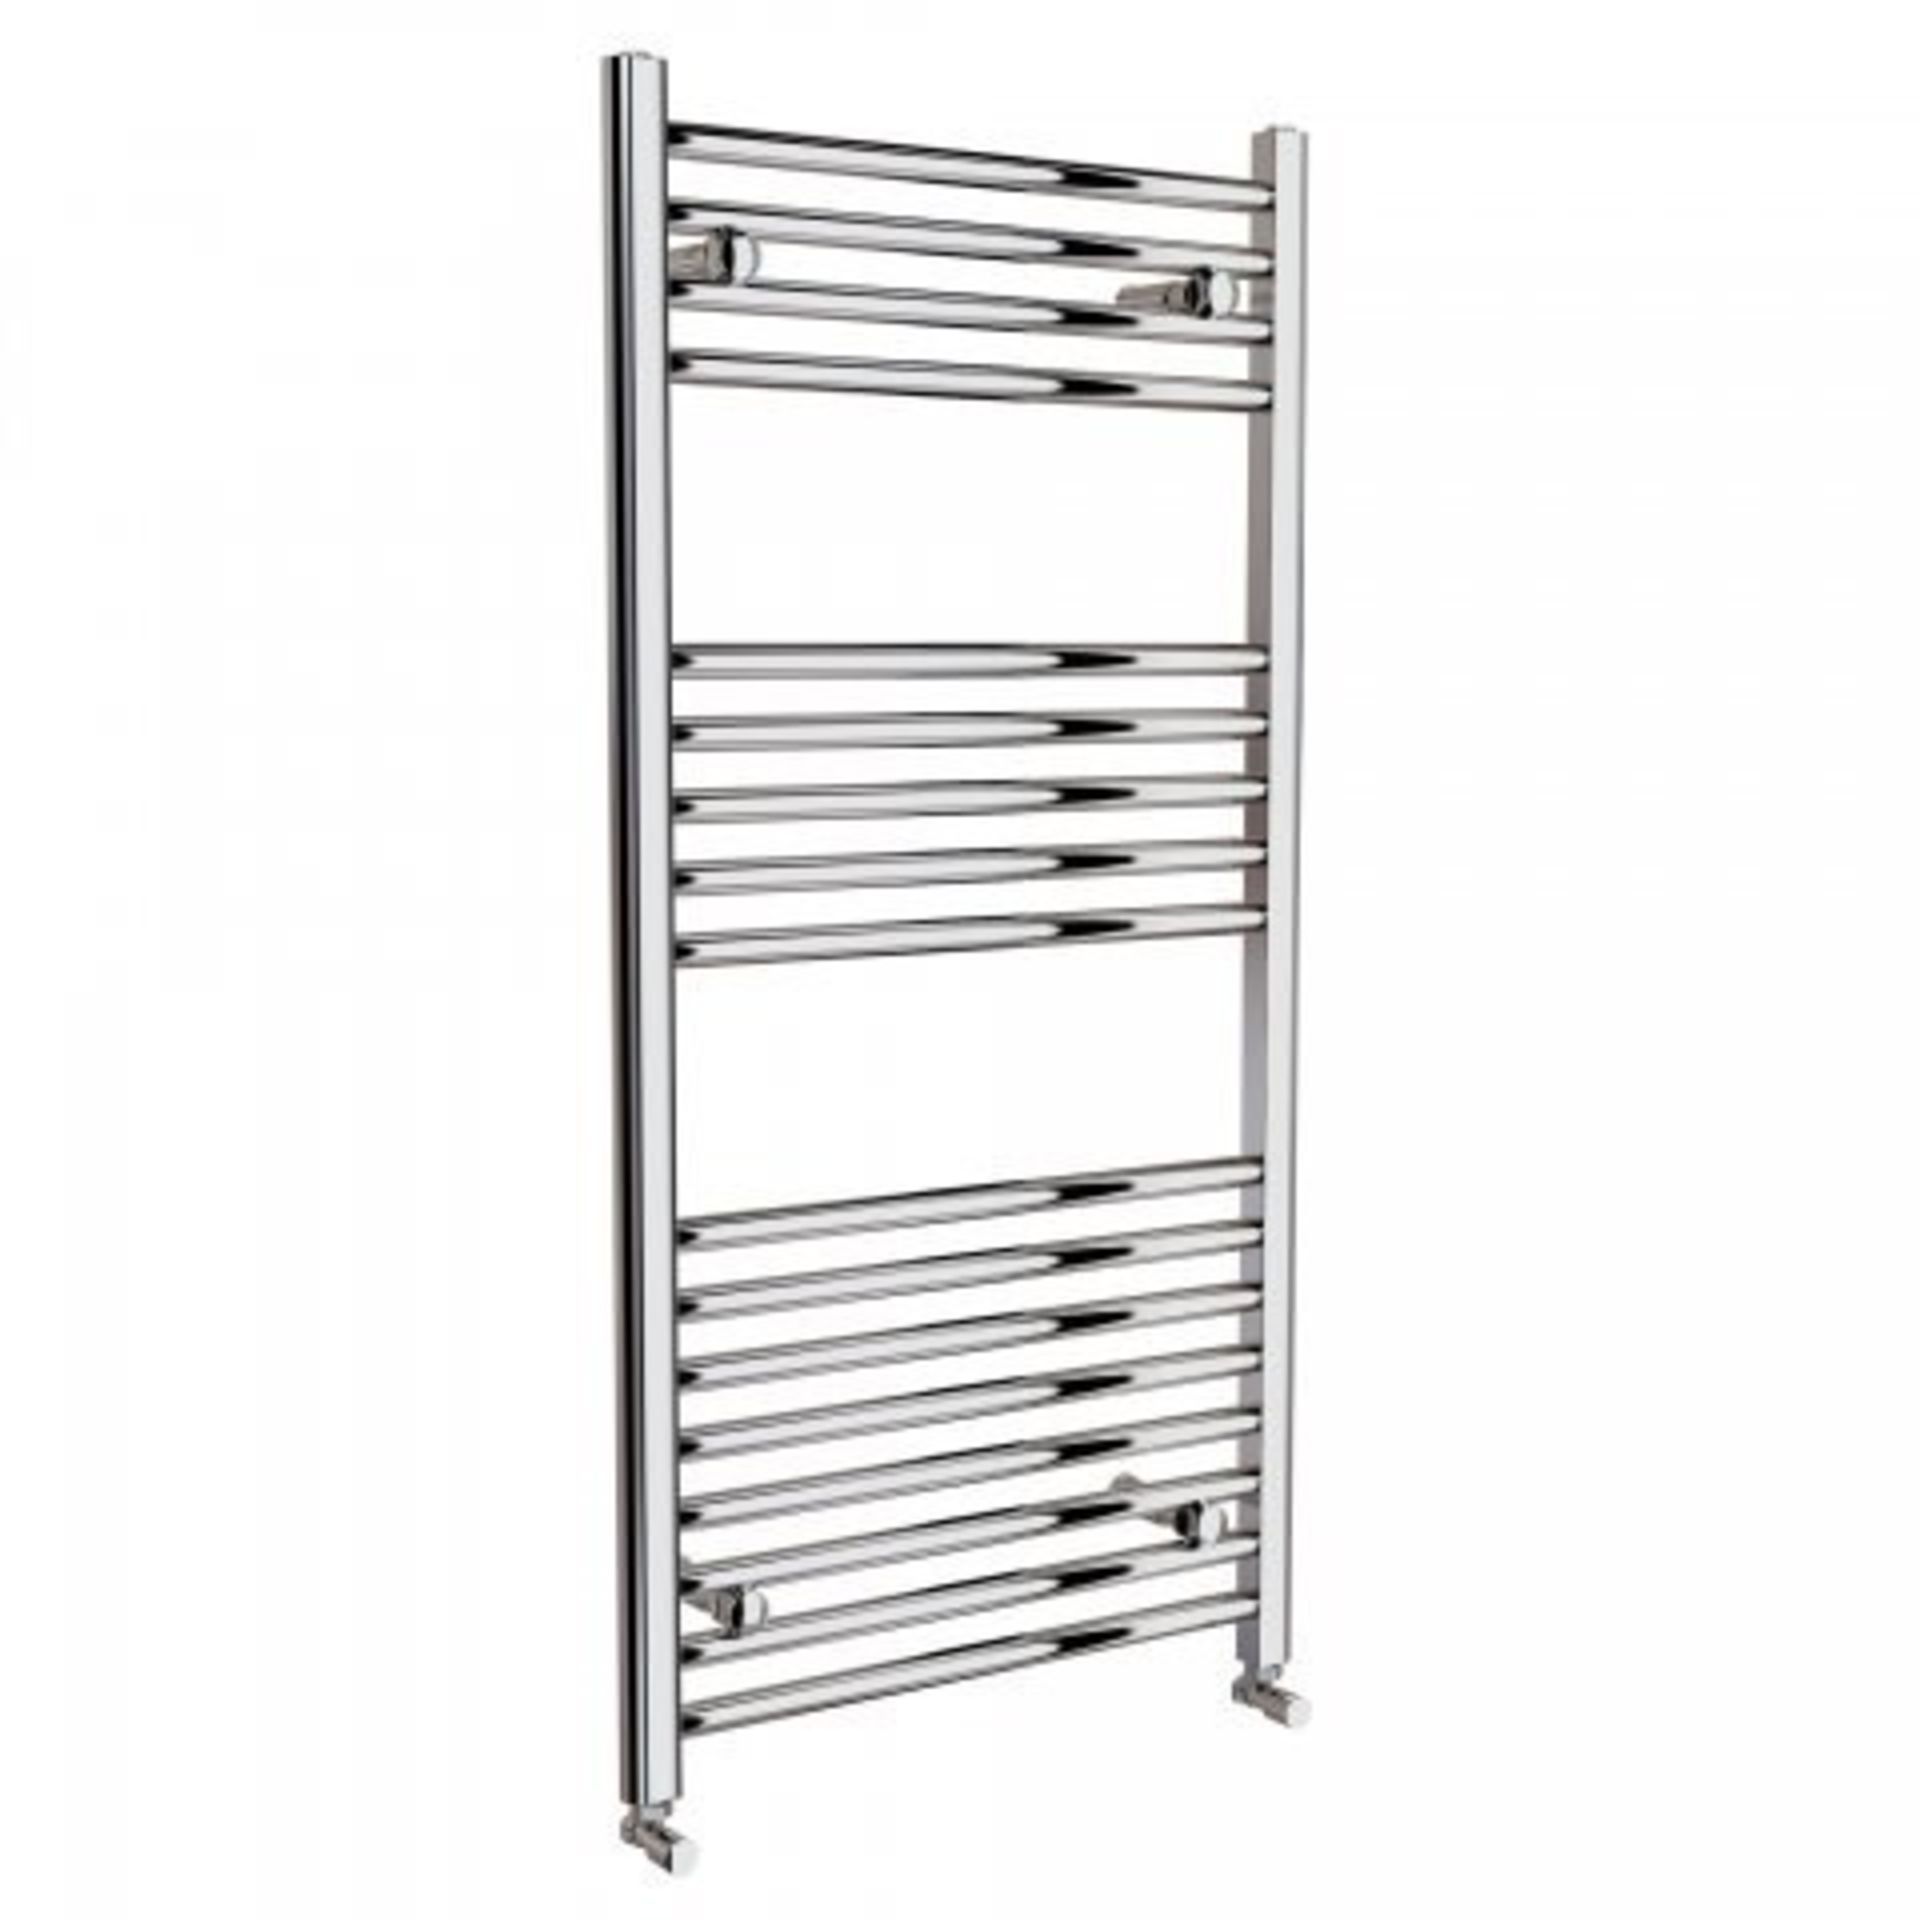 PALLET TO CONTAIN 6 X 1200x600mm - 20mm Tubes - Chrome Heated Straight Rail Ladder Towel Radiator. - Image 3 of 3